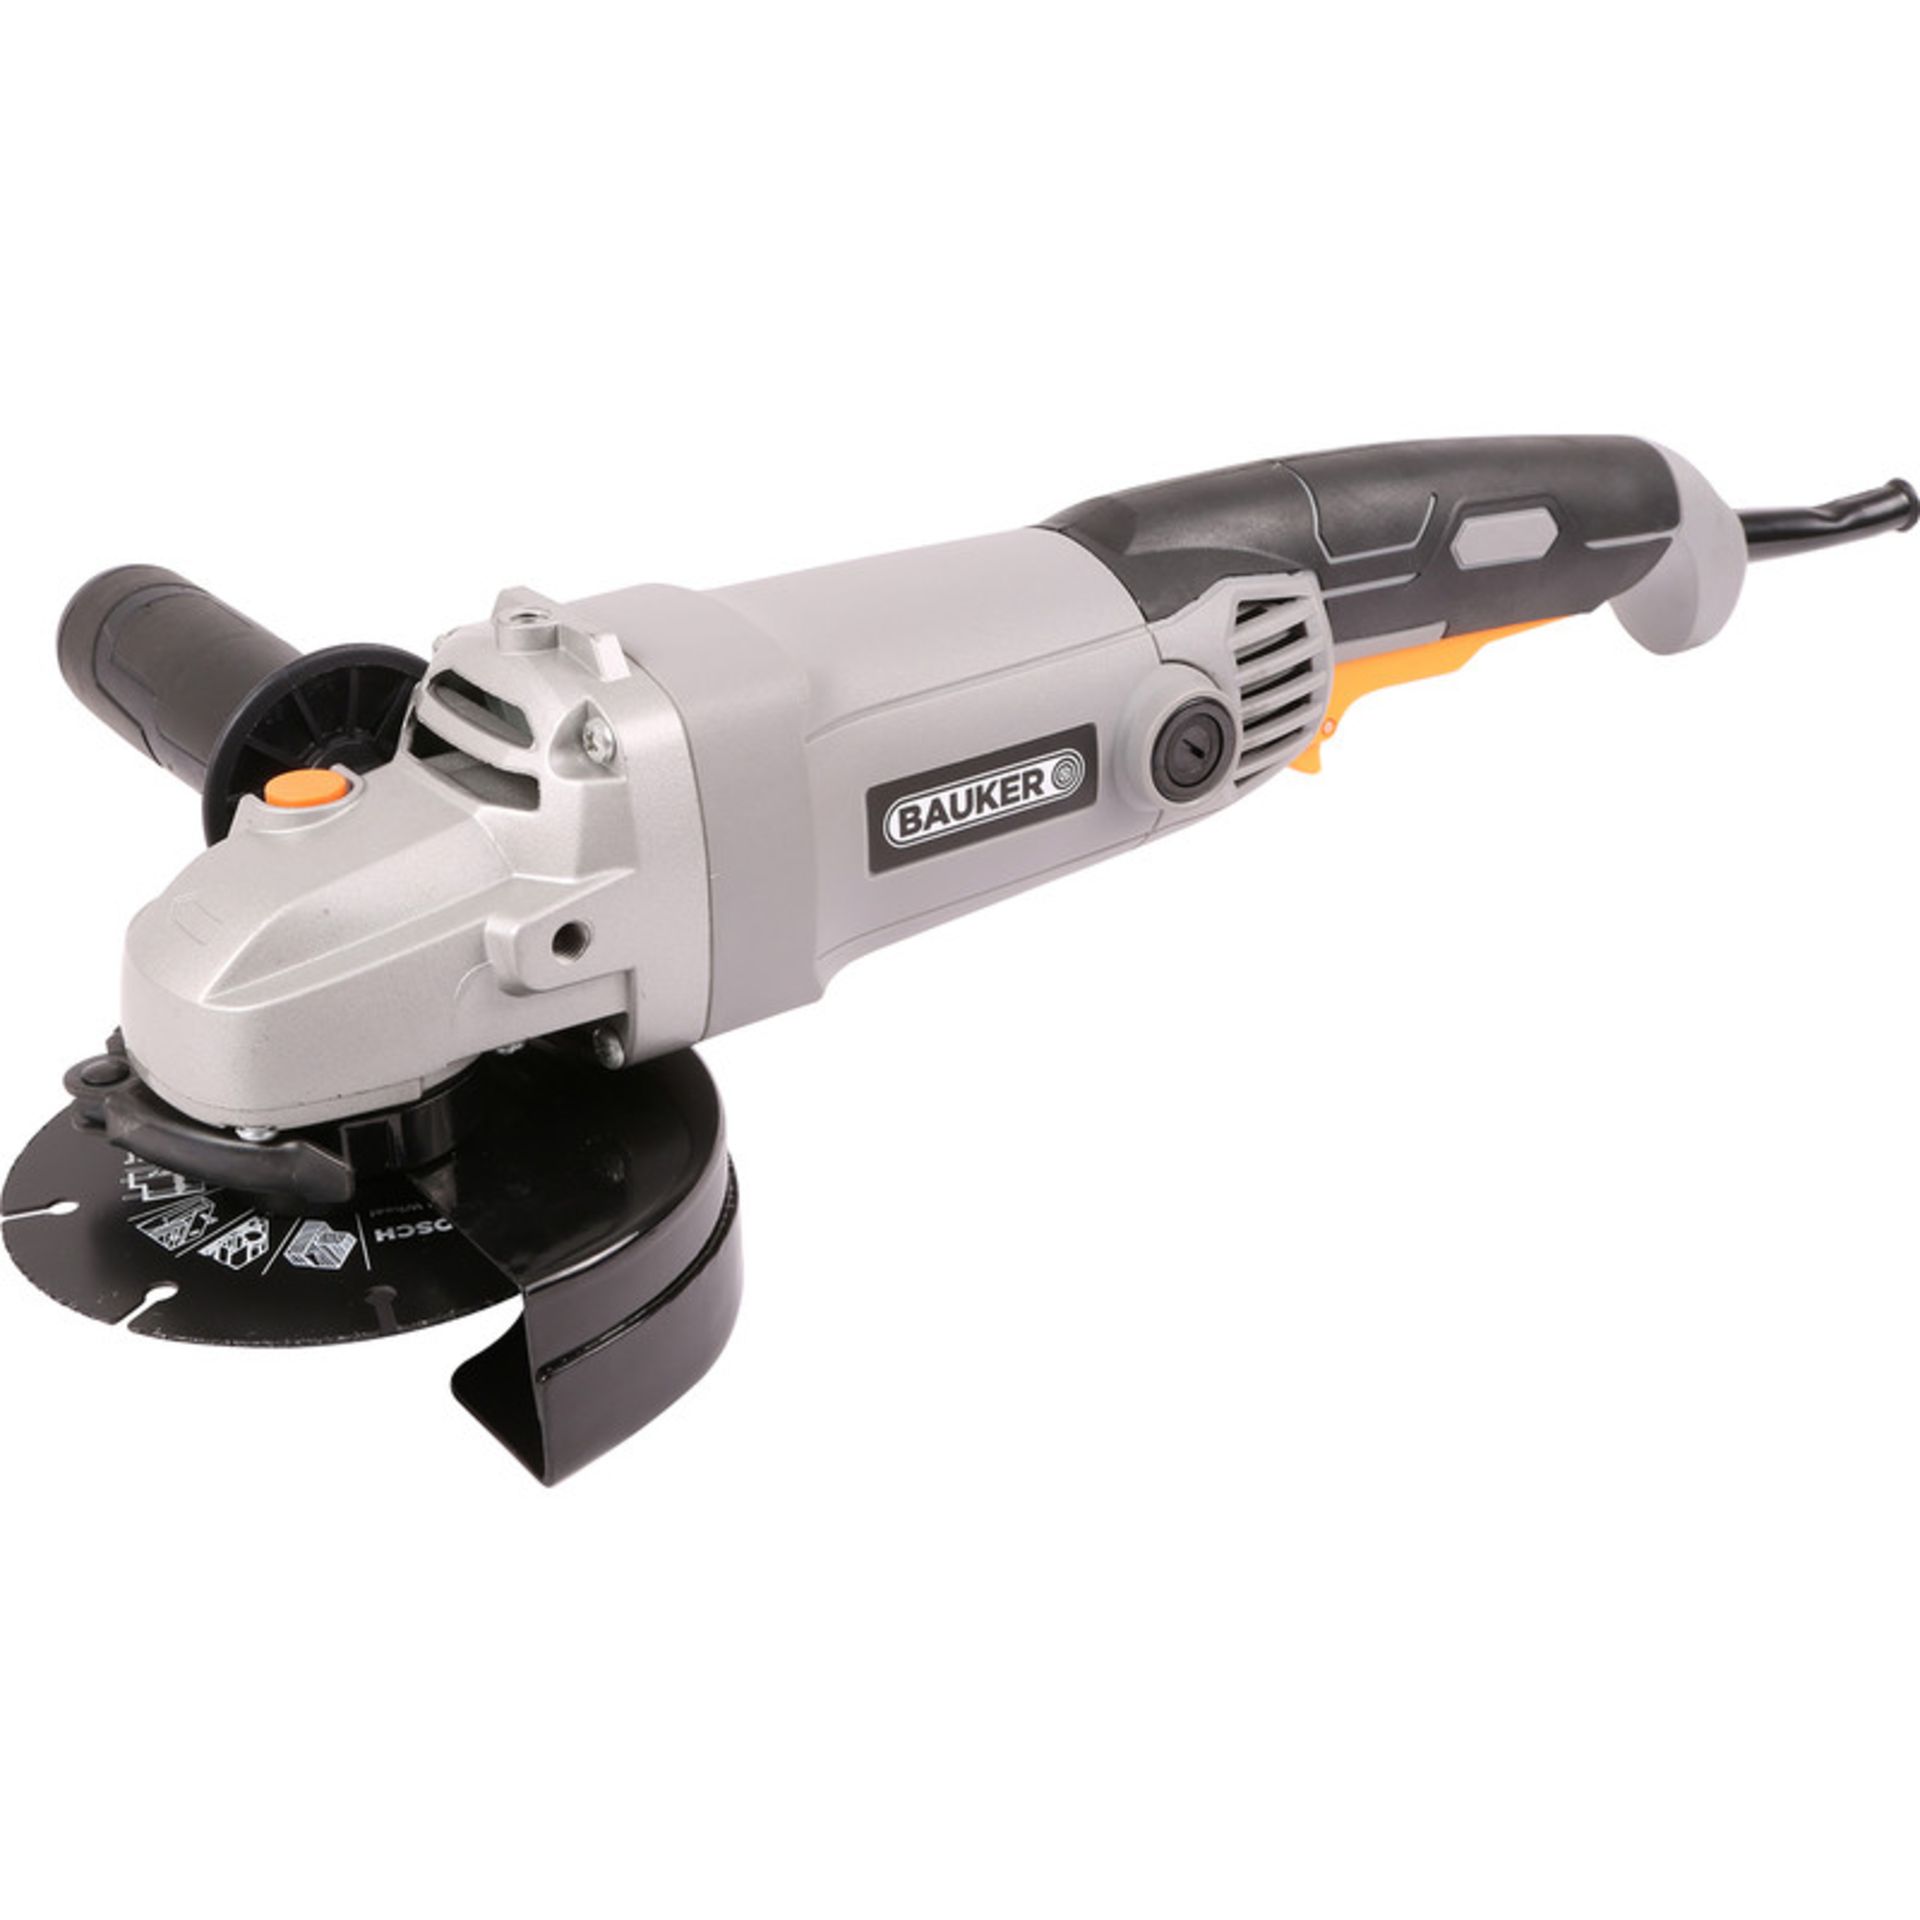 3 x Bauker 1200W 125mm Angle Grinder 230-240V. • No load speed 11,500rpm • 3 position auxiliary